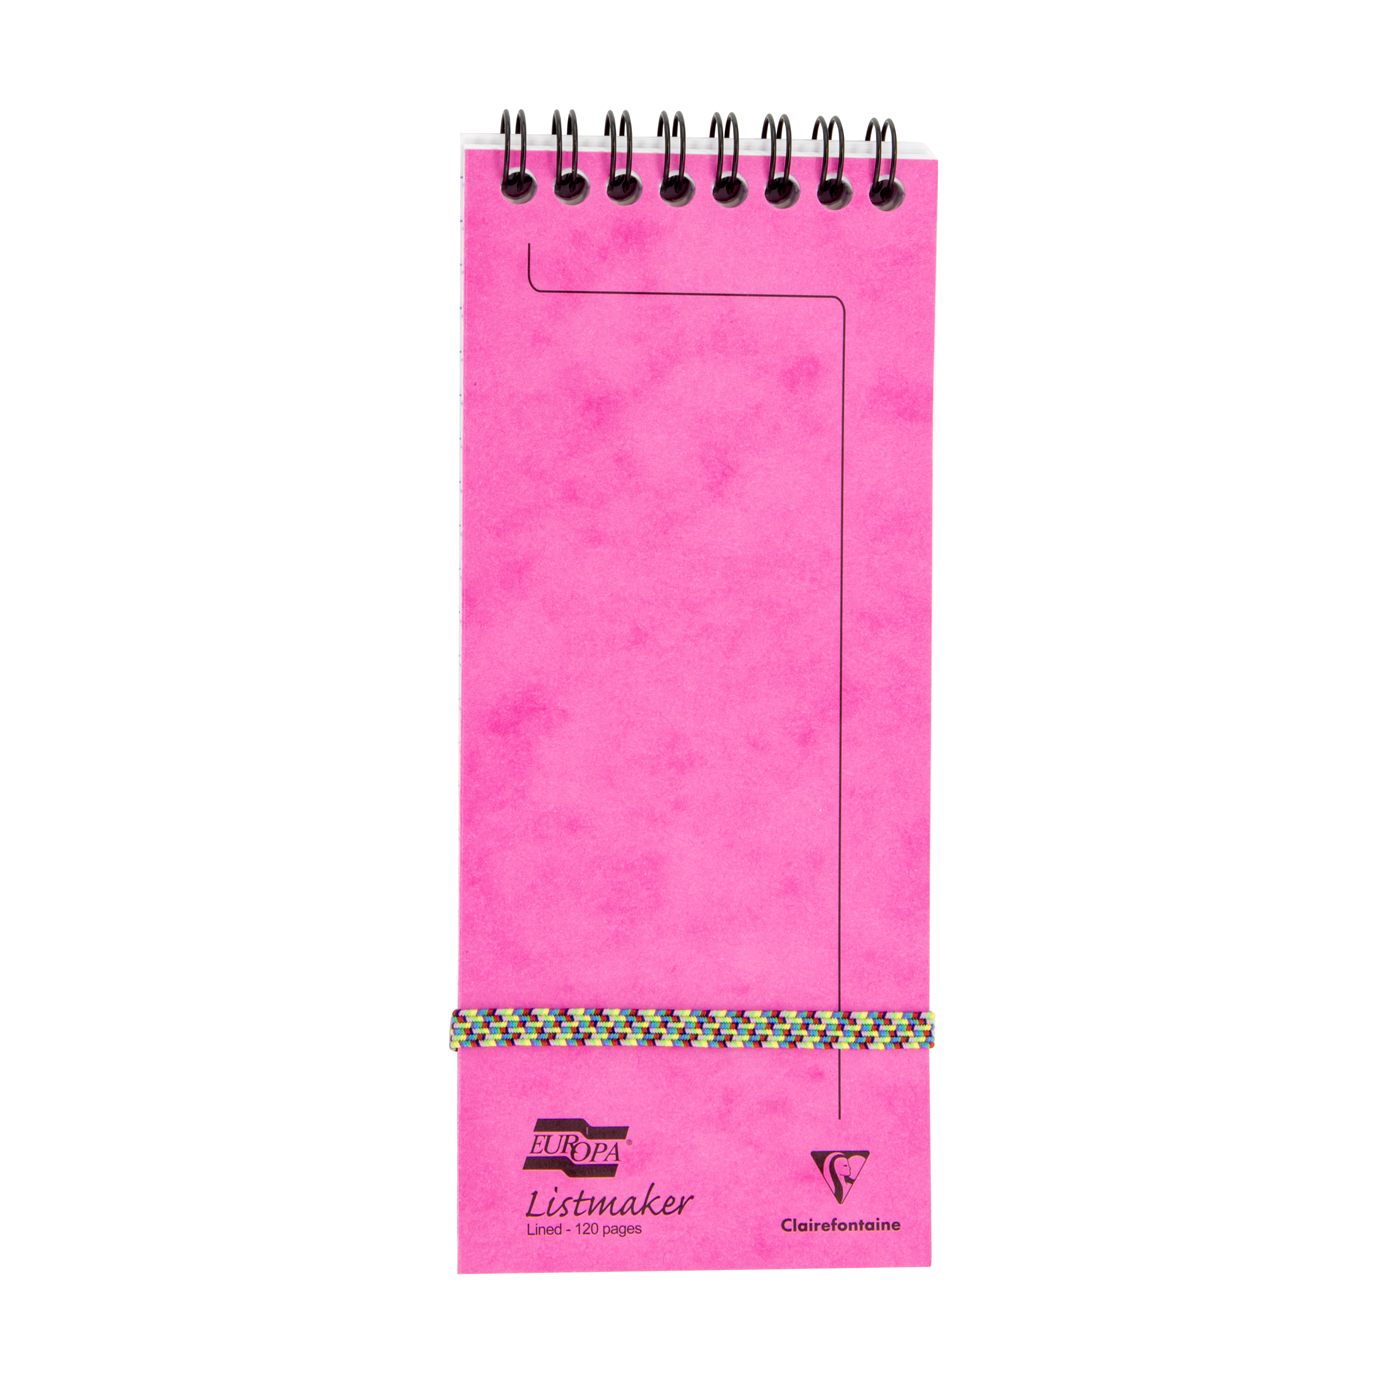 Clairefontaine Europa Listmaker Top Spiralbound Notepad